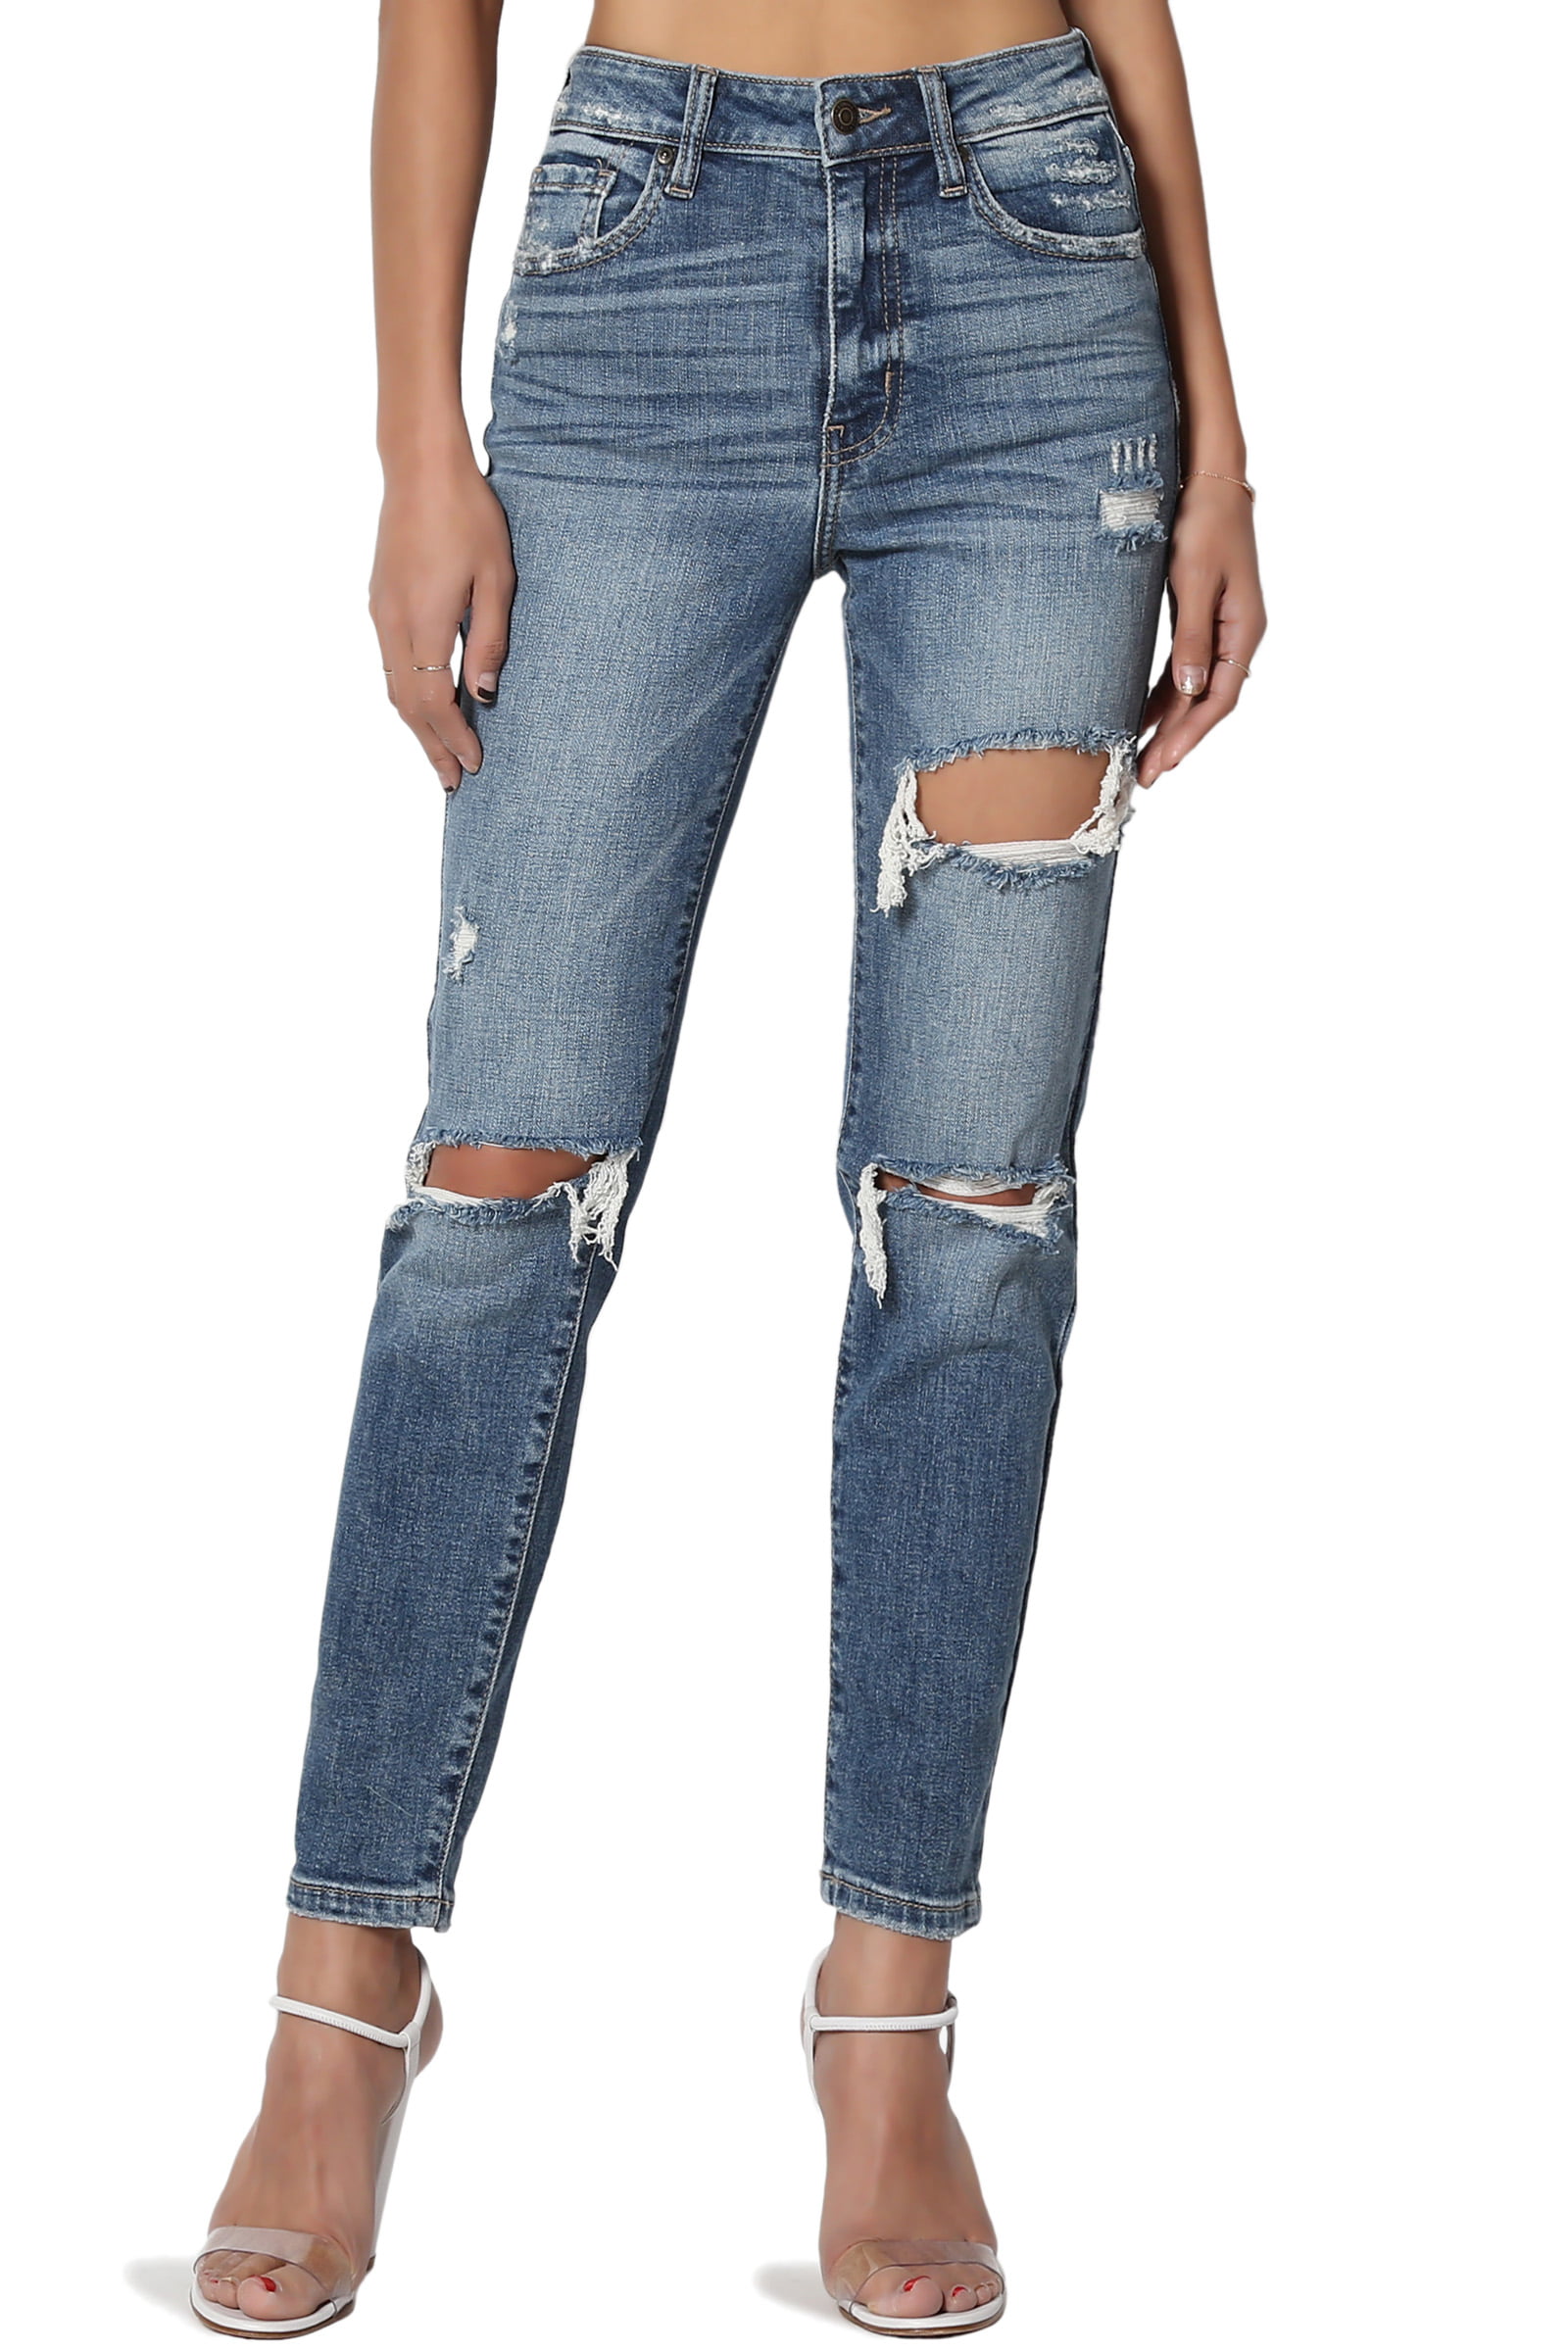 Themogan Themogan Women S Ripped High Rise Distressed Relaxed Tapered Cropped Leg Mom Jeans